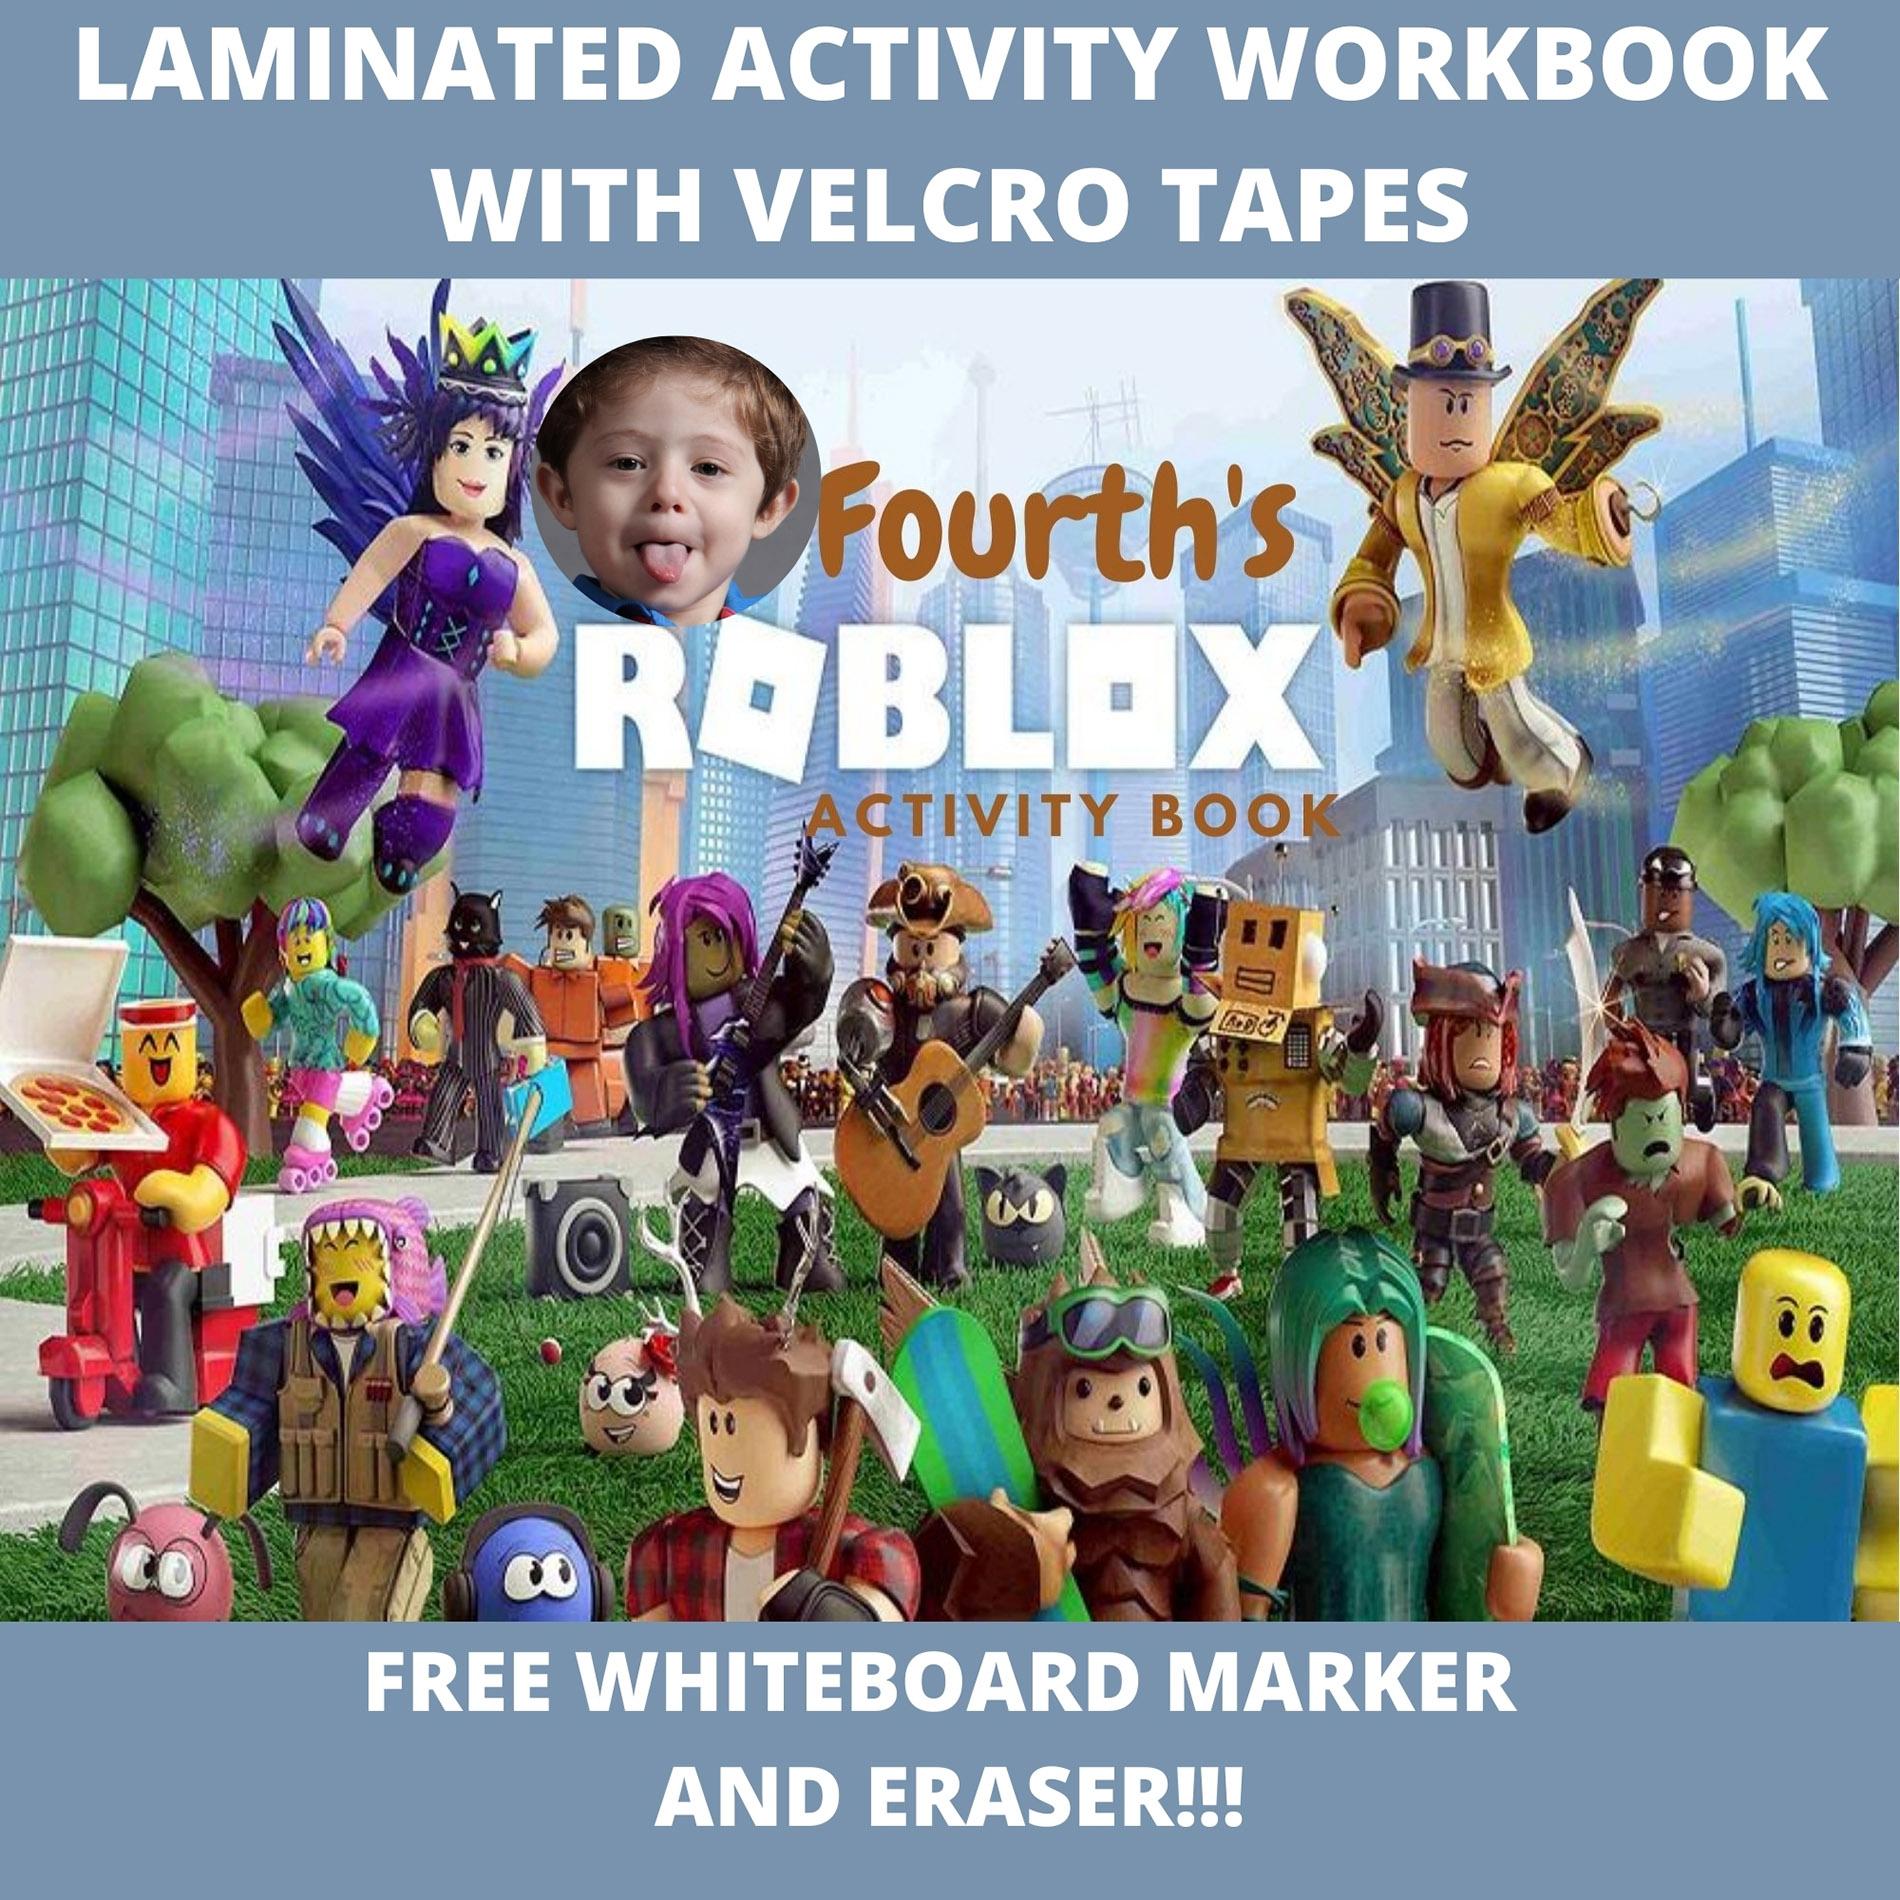 Roblox Laminated Activity Workbook With Velcro Tapes Lazada Ph - roblox activity book